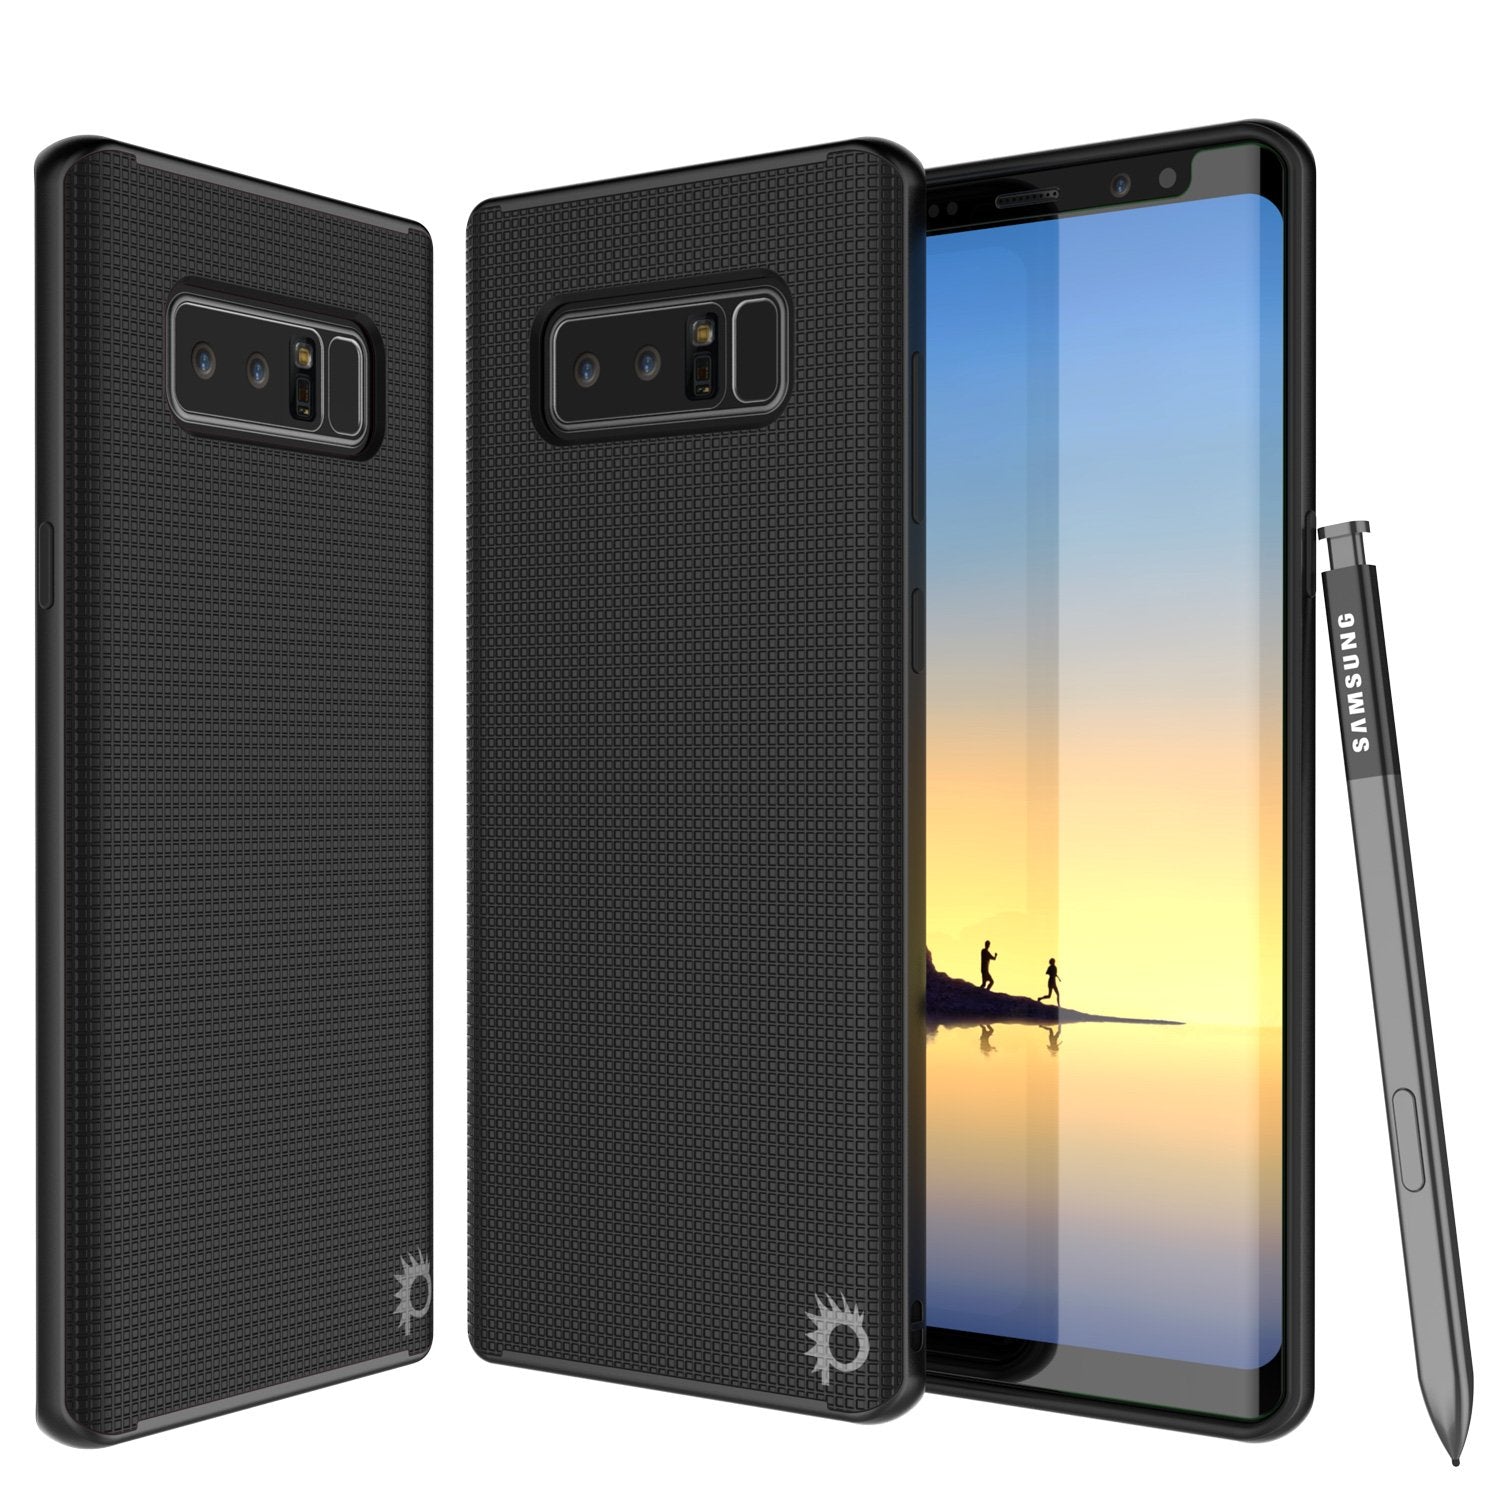 Galaxy Note 8 Case, PunkCase [Stealth Series] Hybrid 3-Piece Shockproof Dual Layer Cover [Non-Slip] [Soft TPU + PC Bumper] with PUNKSHIELD Screen Protector for Samsung Note 8 [Black]